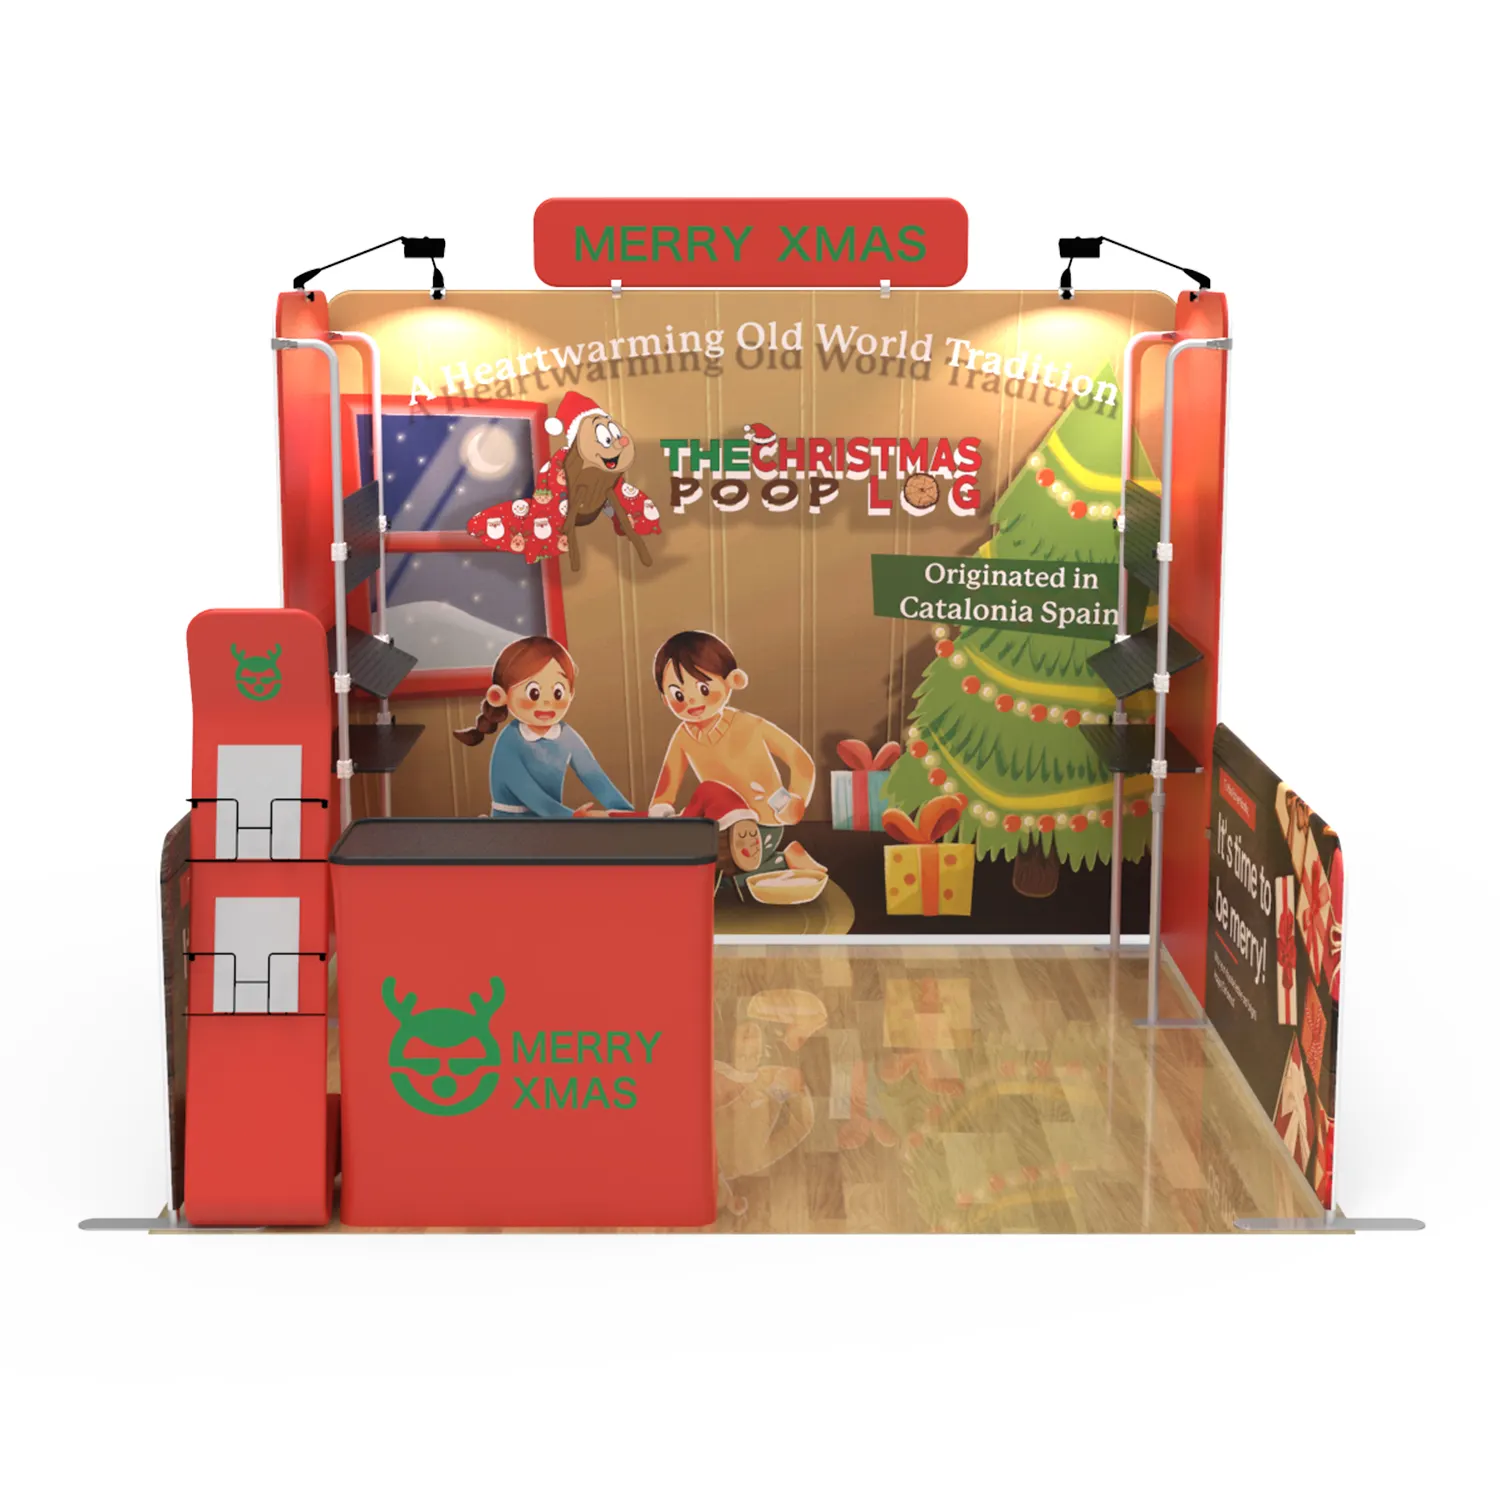 Wholesale exhibition display system 10x10 portable trade show booth with shelves